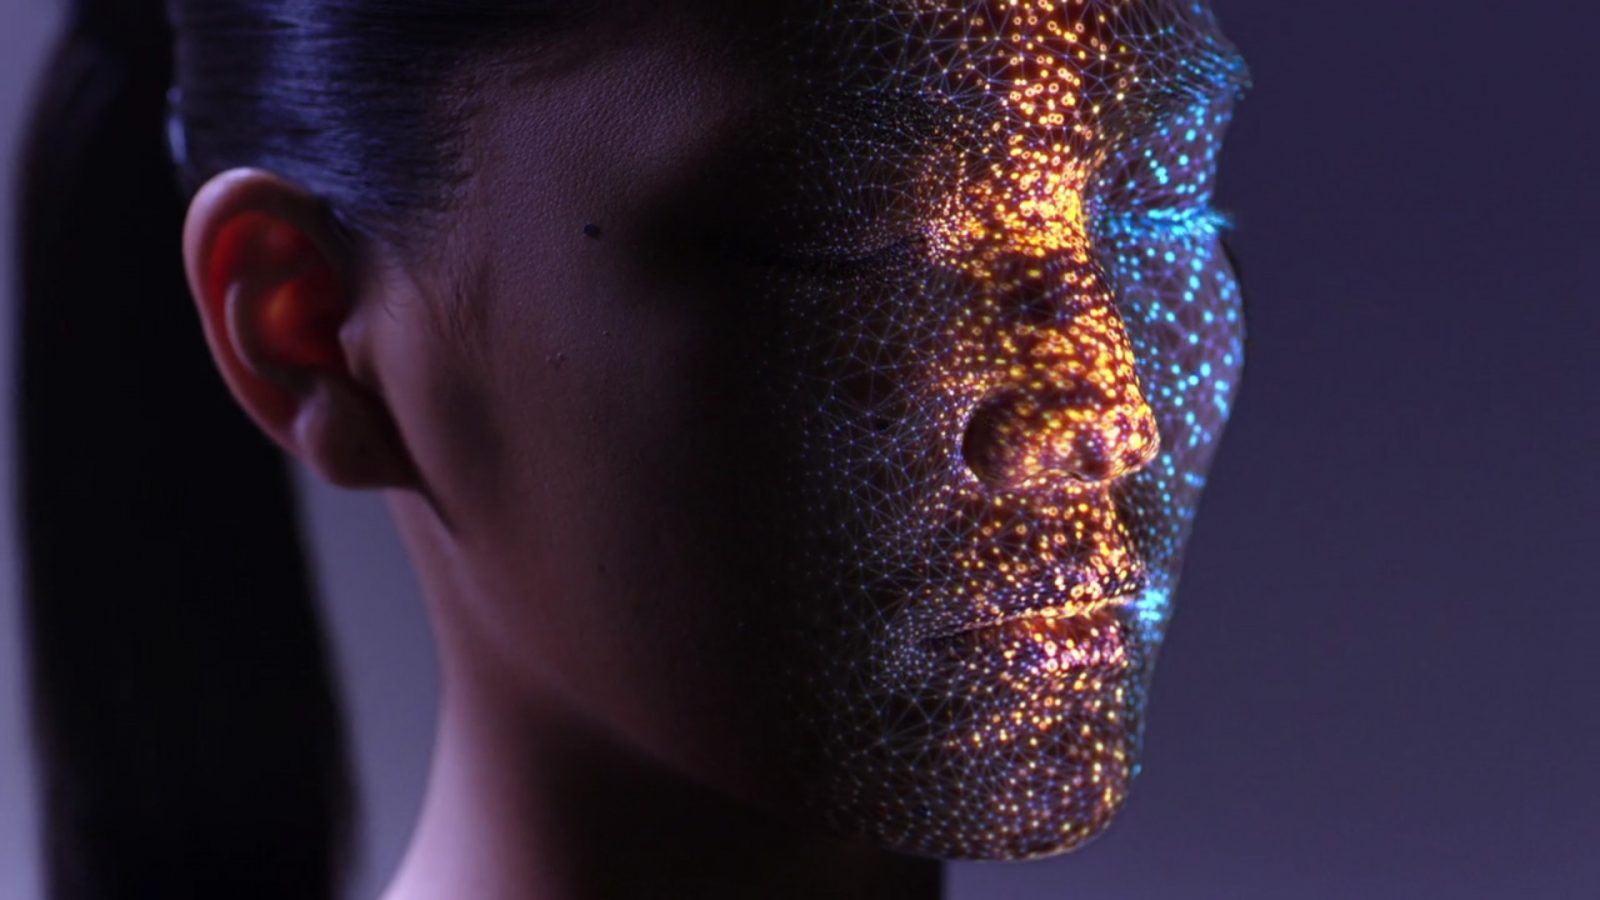 Real-time face tracking + 3d projection mapping